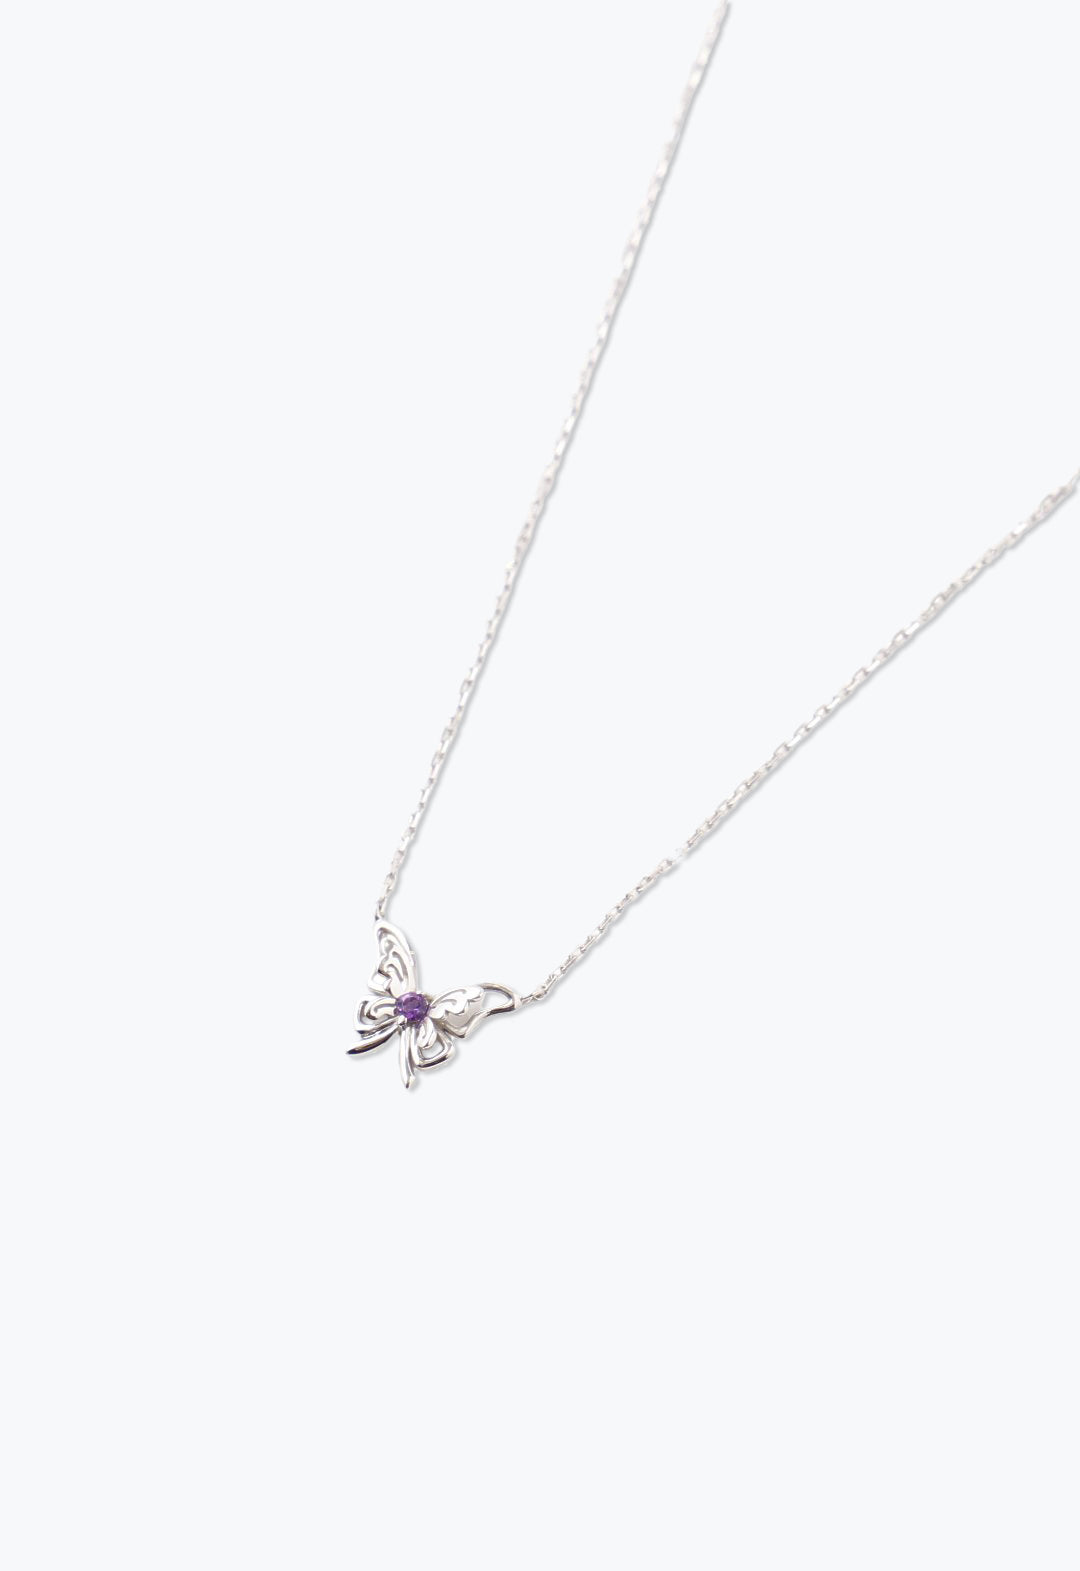 Ribbon Butterfly Necklace, butterfly is silver Plated metal, an Amethyst is at butterfly center